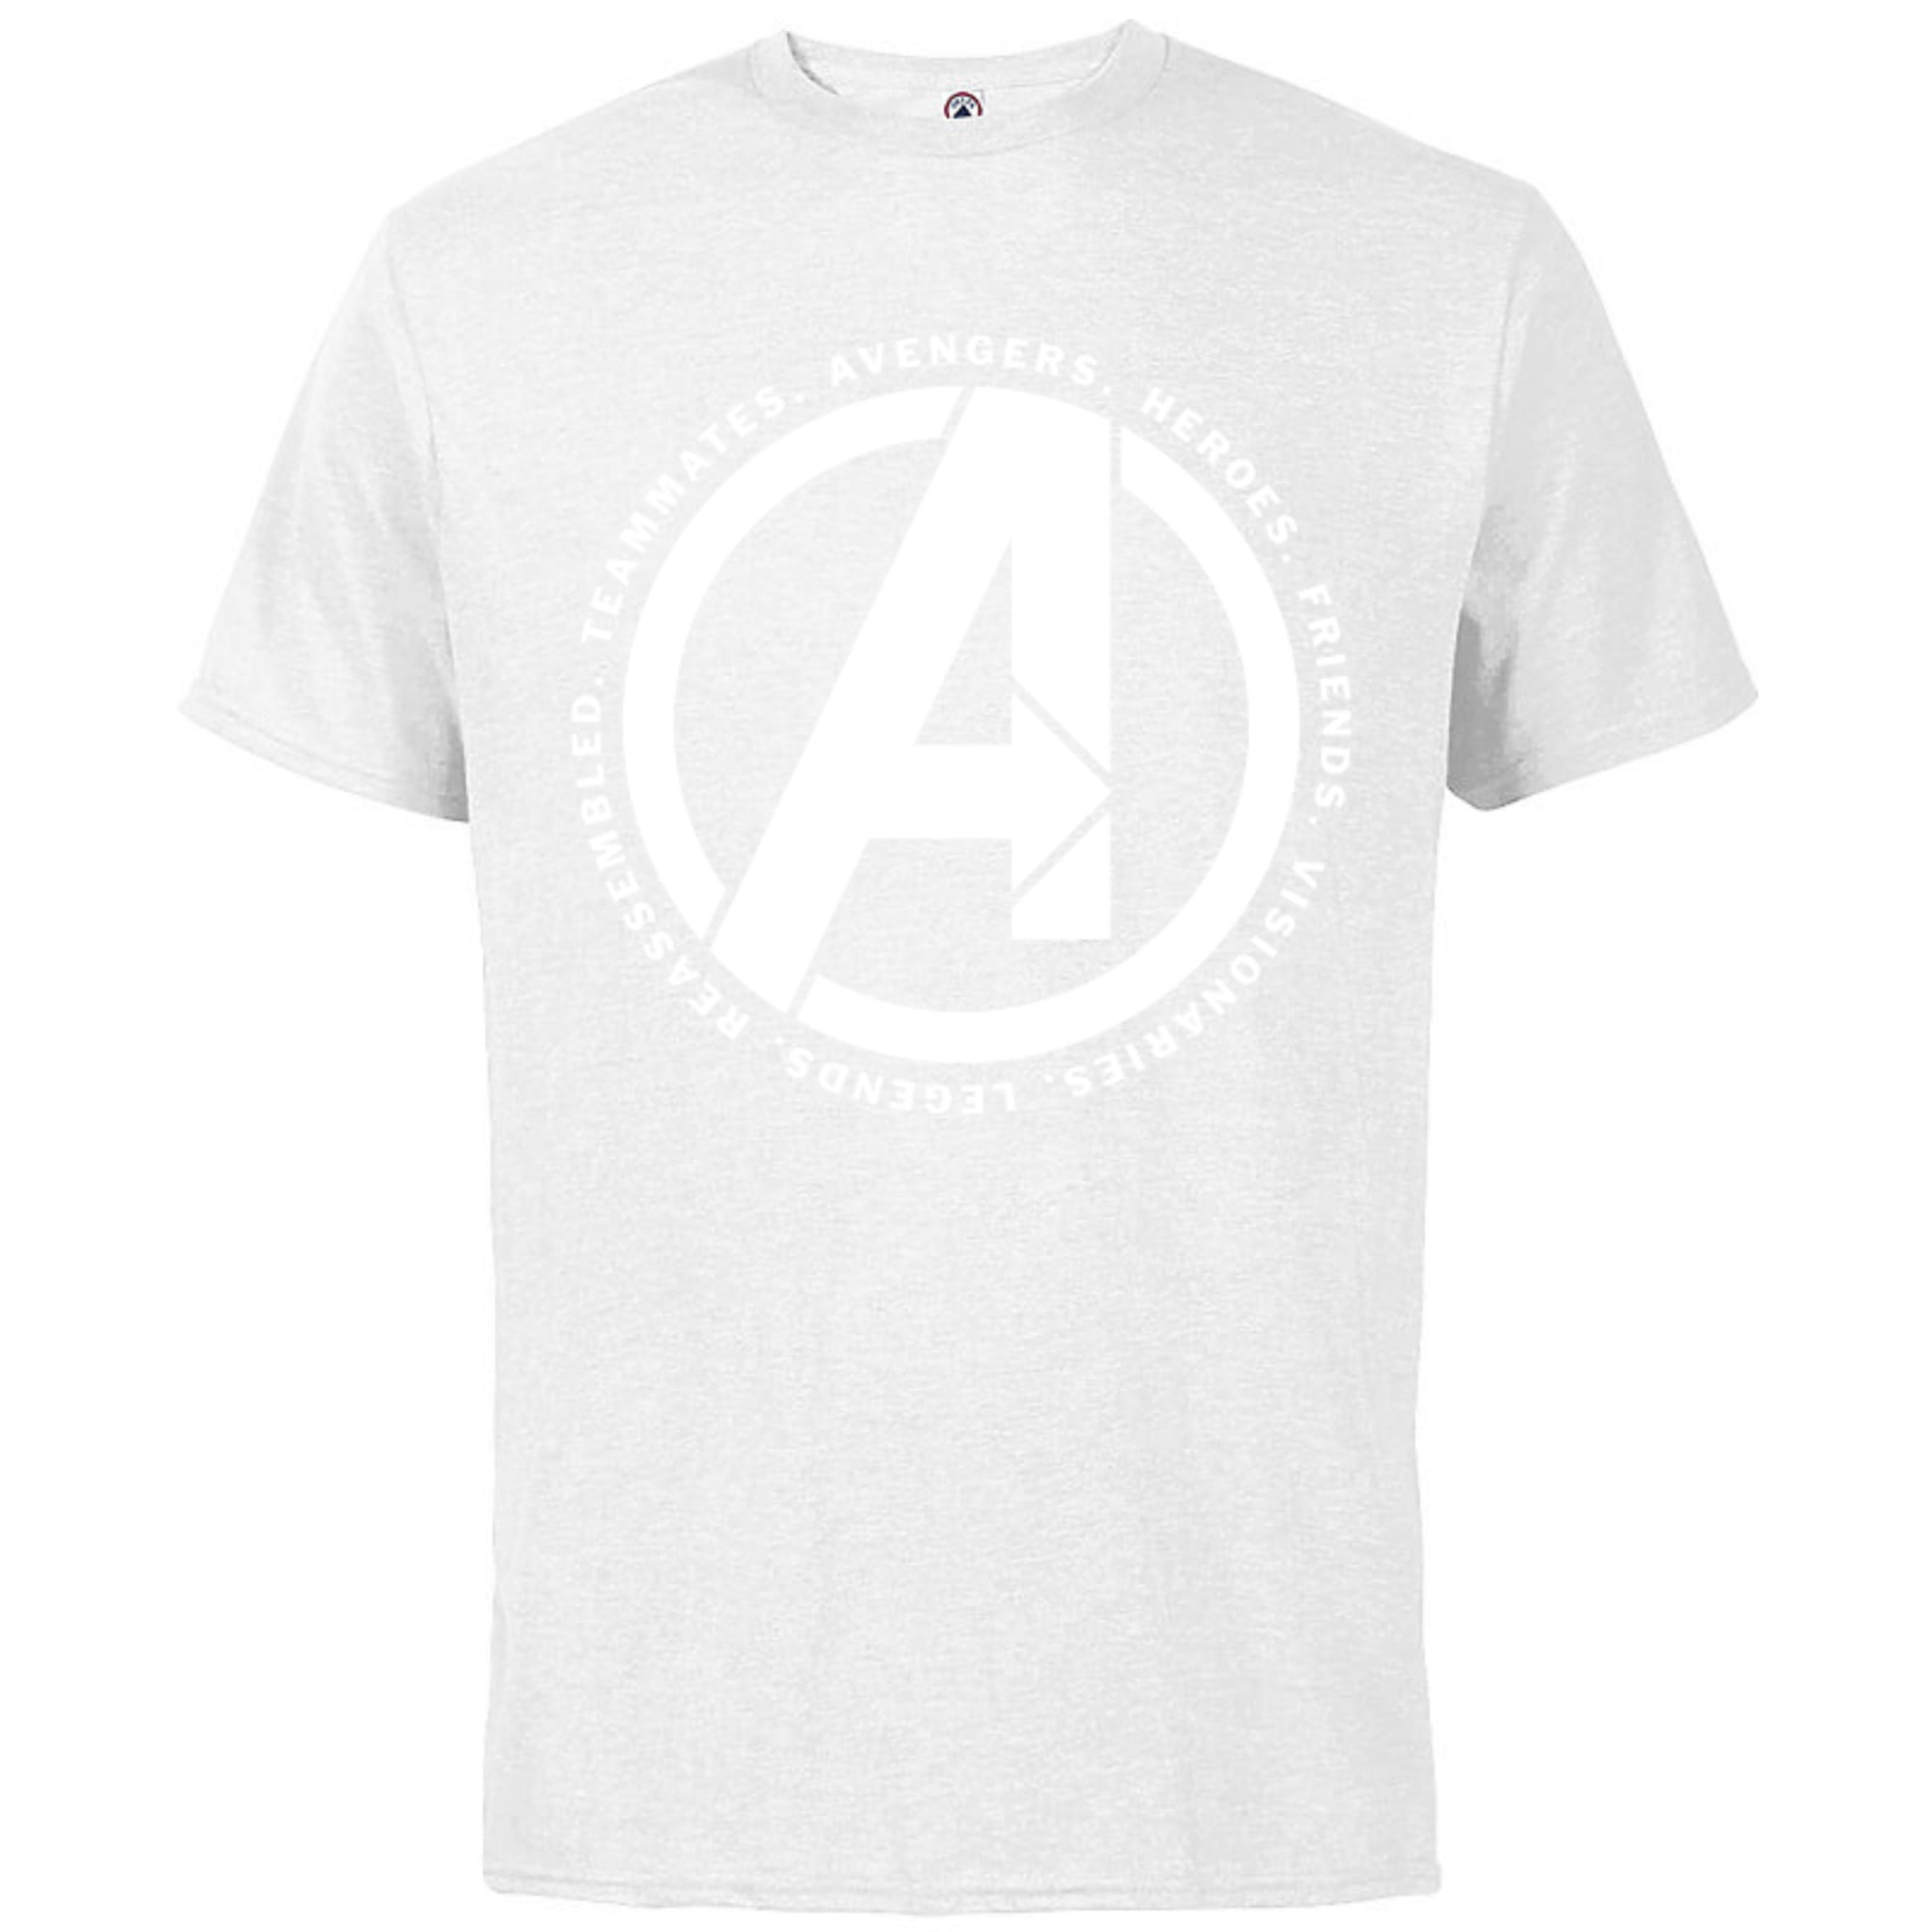 Marvel Avengers: Endgame Logo Heroes and Legends - Short Sleeve Cotton T- Shirt for Adults - Customized-Black